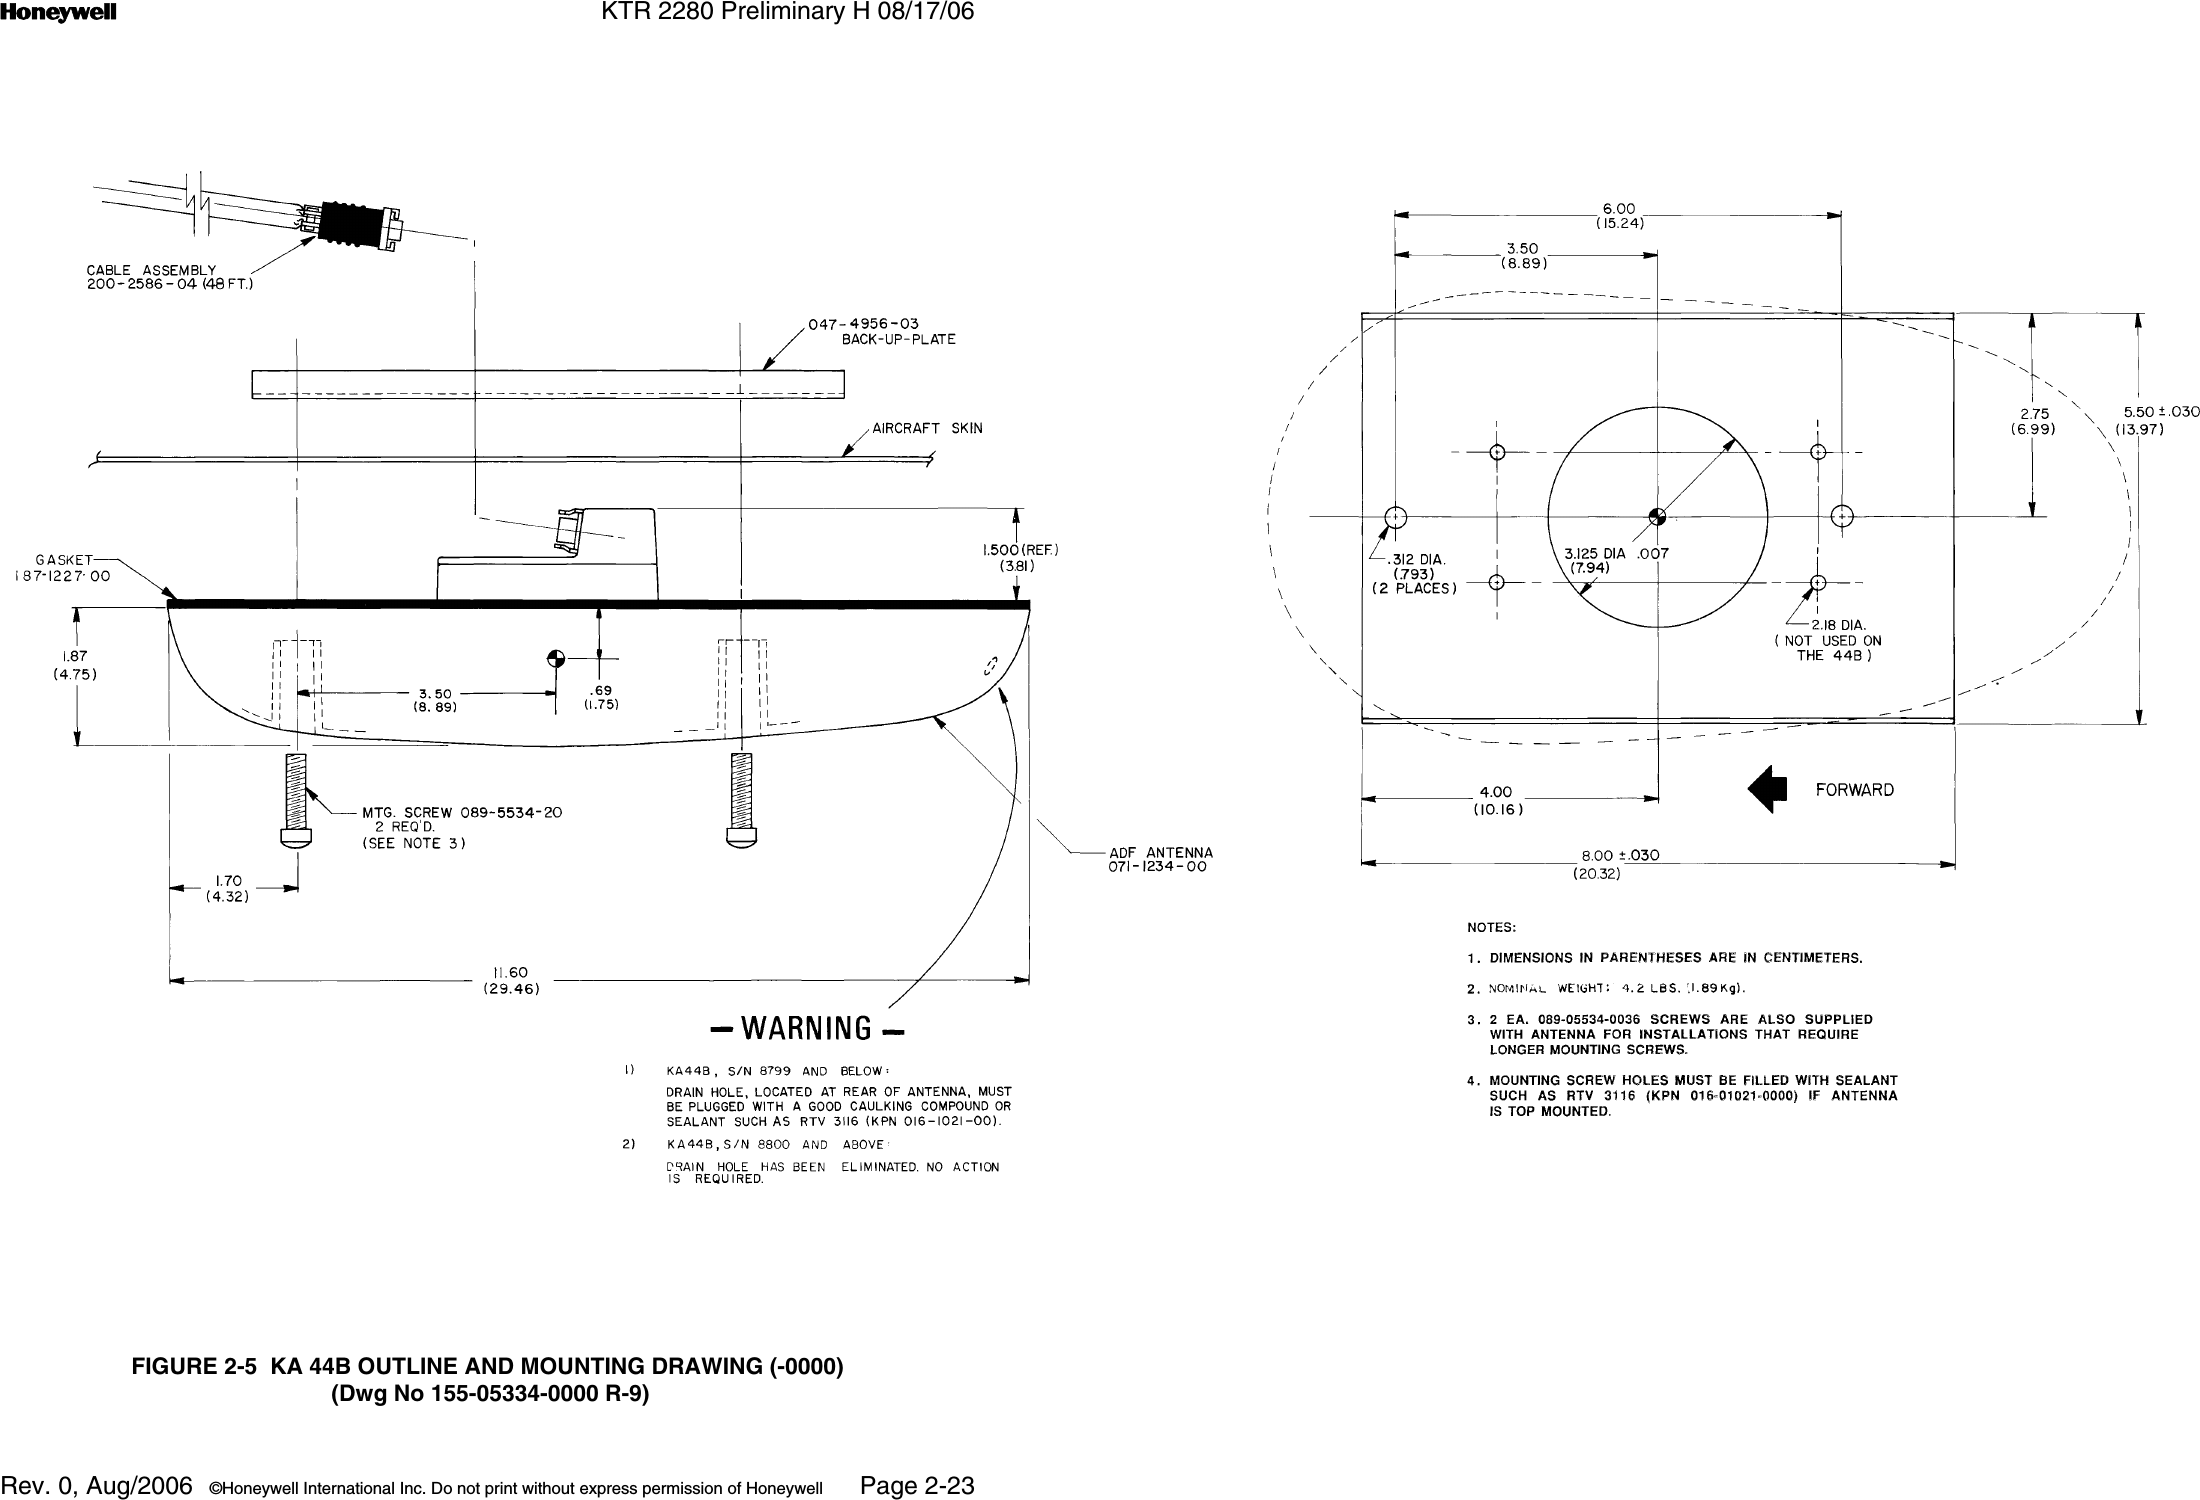 n KTR 2280 Preliminary H 08/17/06Rev. 0, Aug/2006  ©Honeywell International Inc. Do not print without express permission of Honeywell Page 2-23FIGURE 2-5  KA 44B OUTLINE AND MOUNTING DRAWING (-0000) (Dwg No 155-05334-0000 R-9)